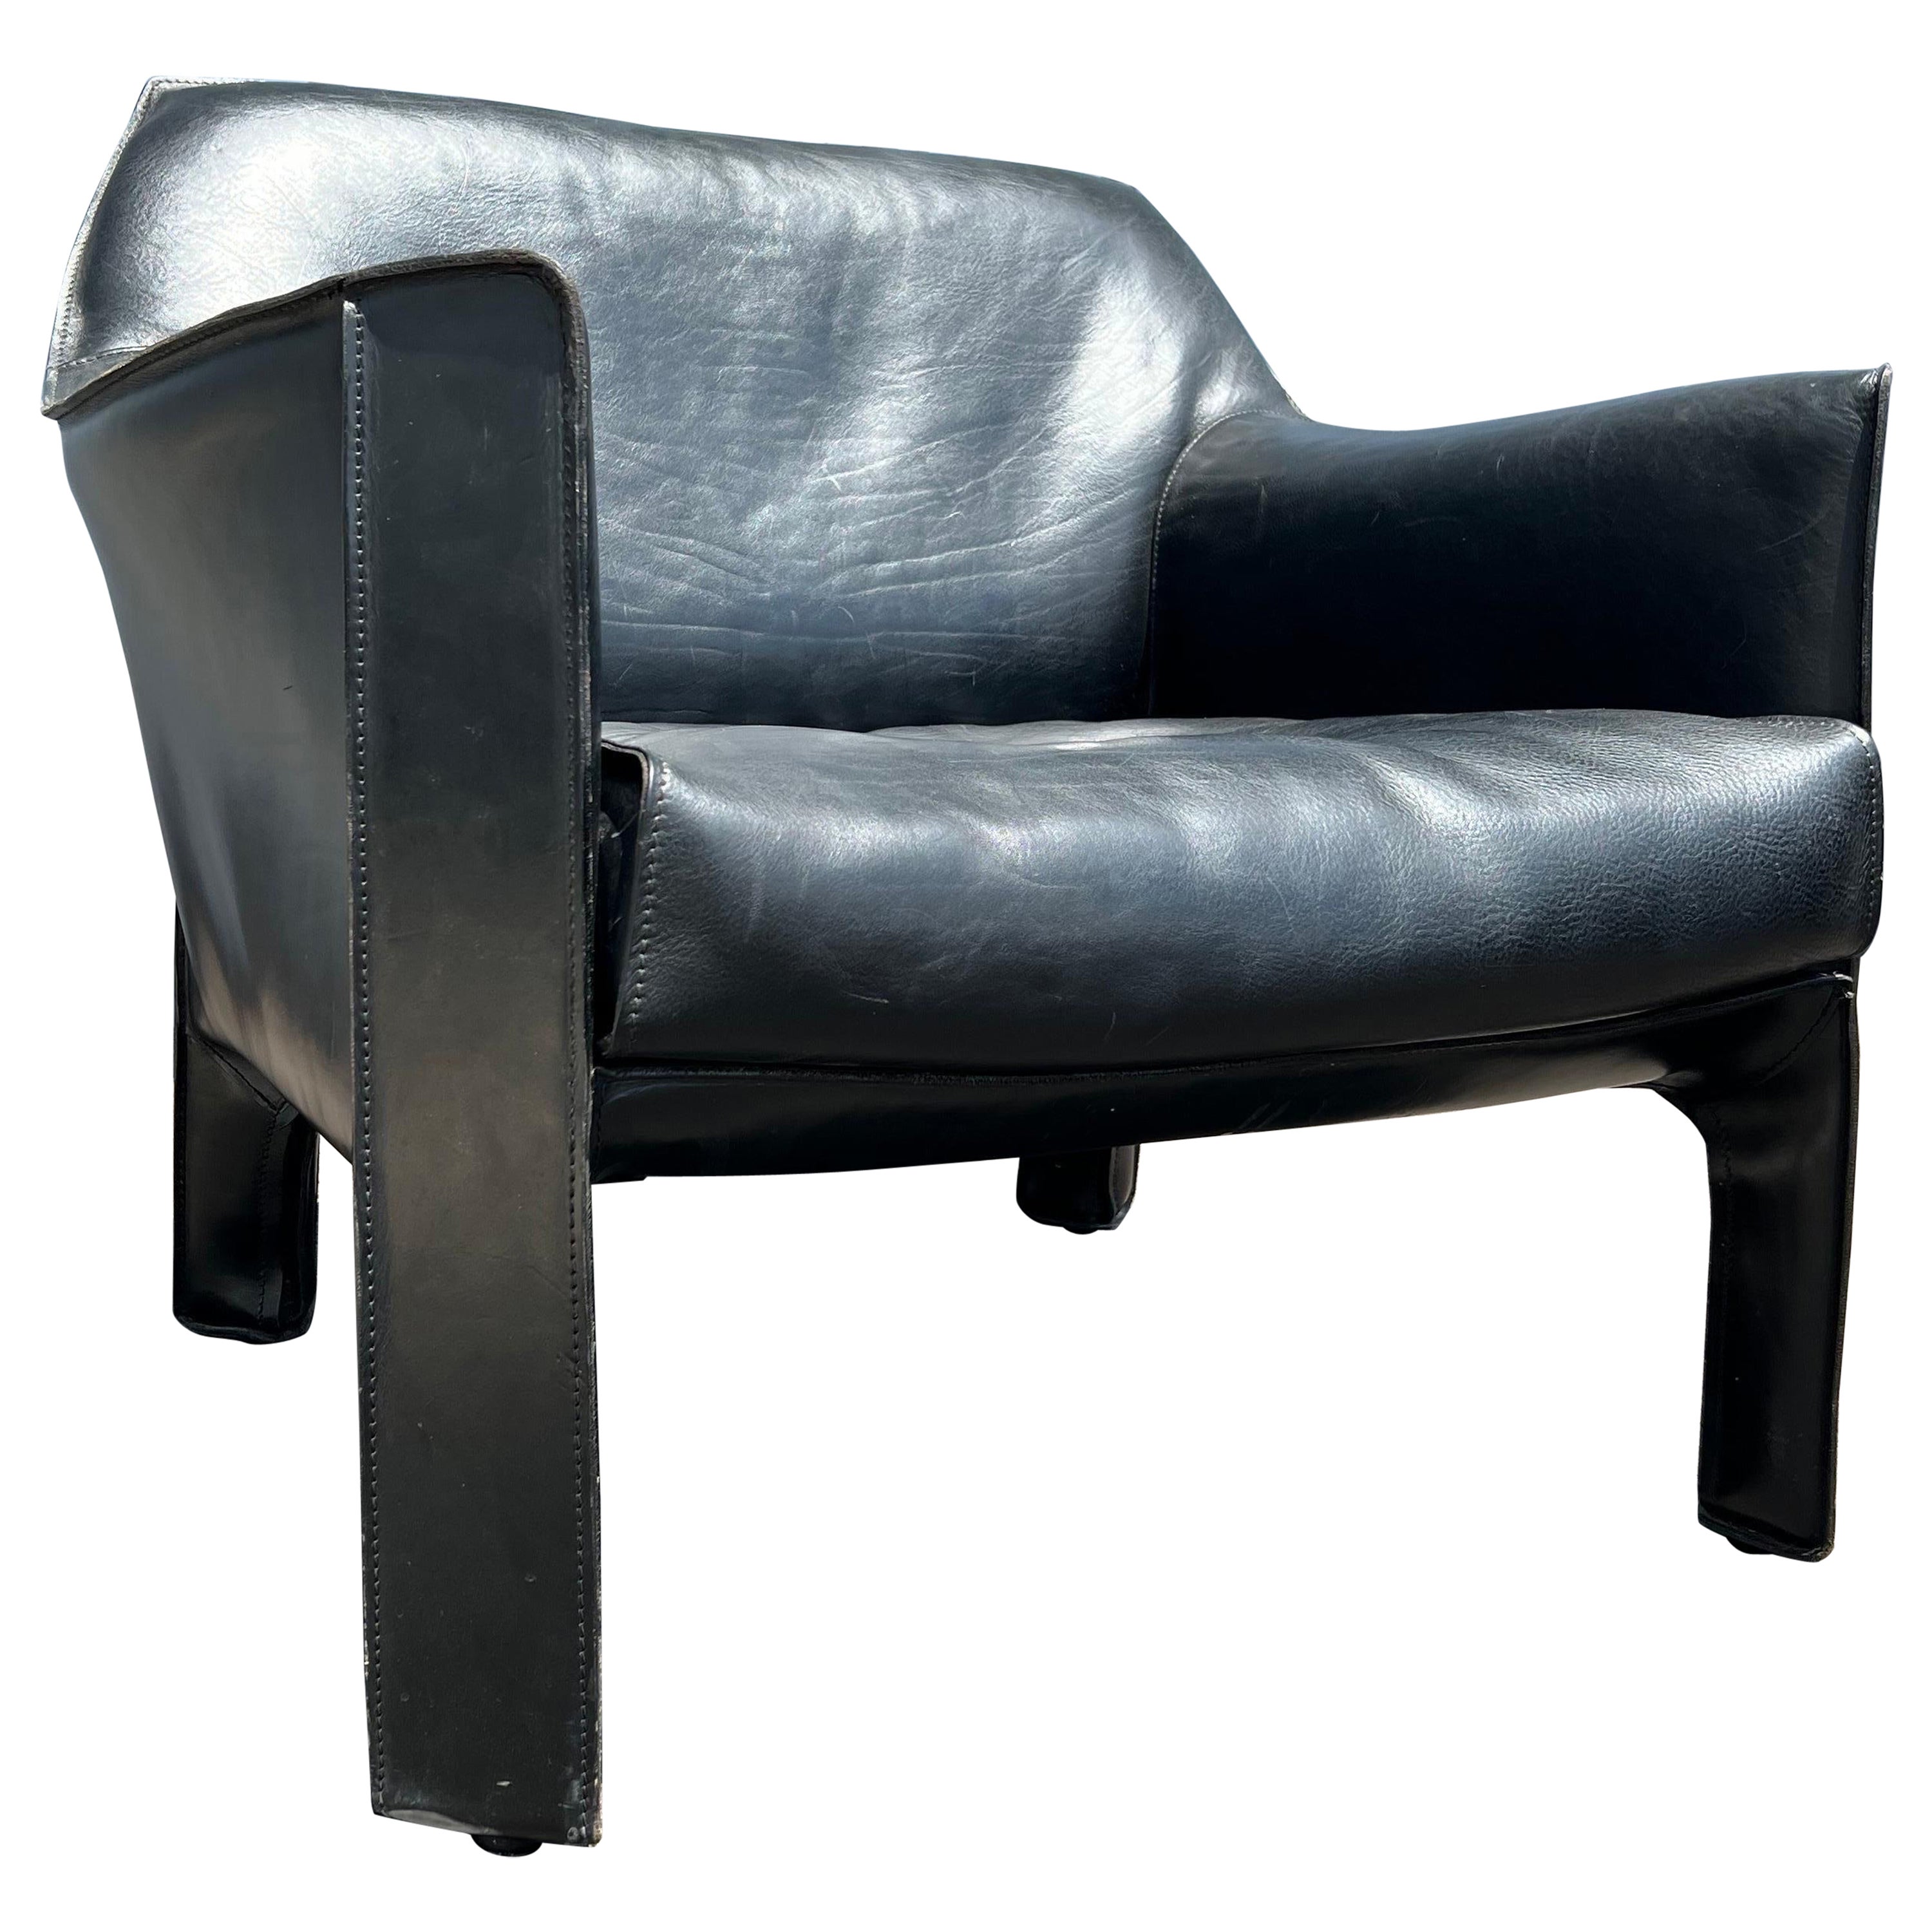 Vintage Mario Bellini for Cassina Cab 415 Leather Chair, Circa 1980s